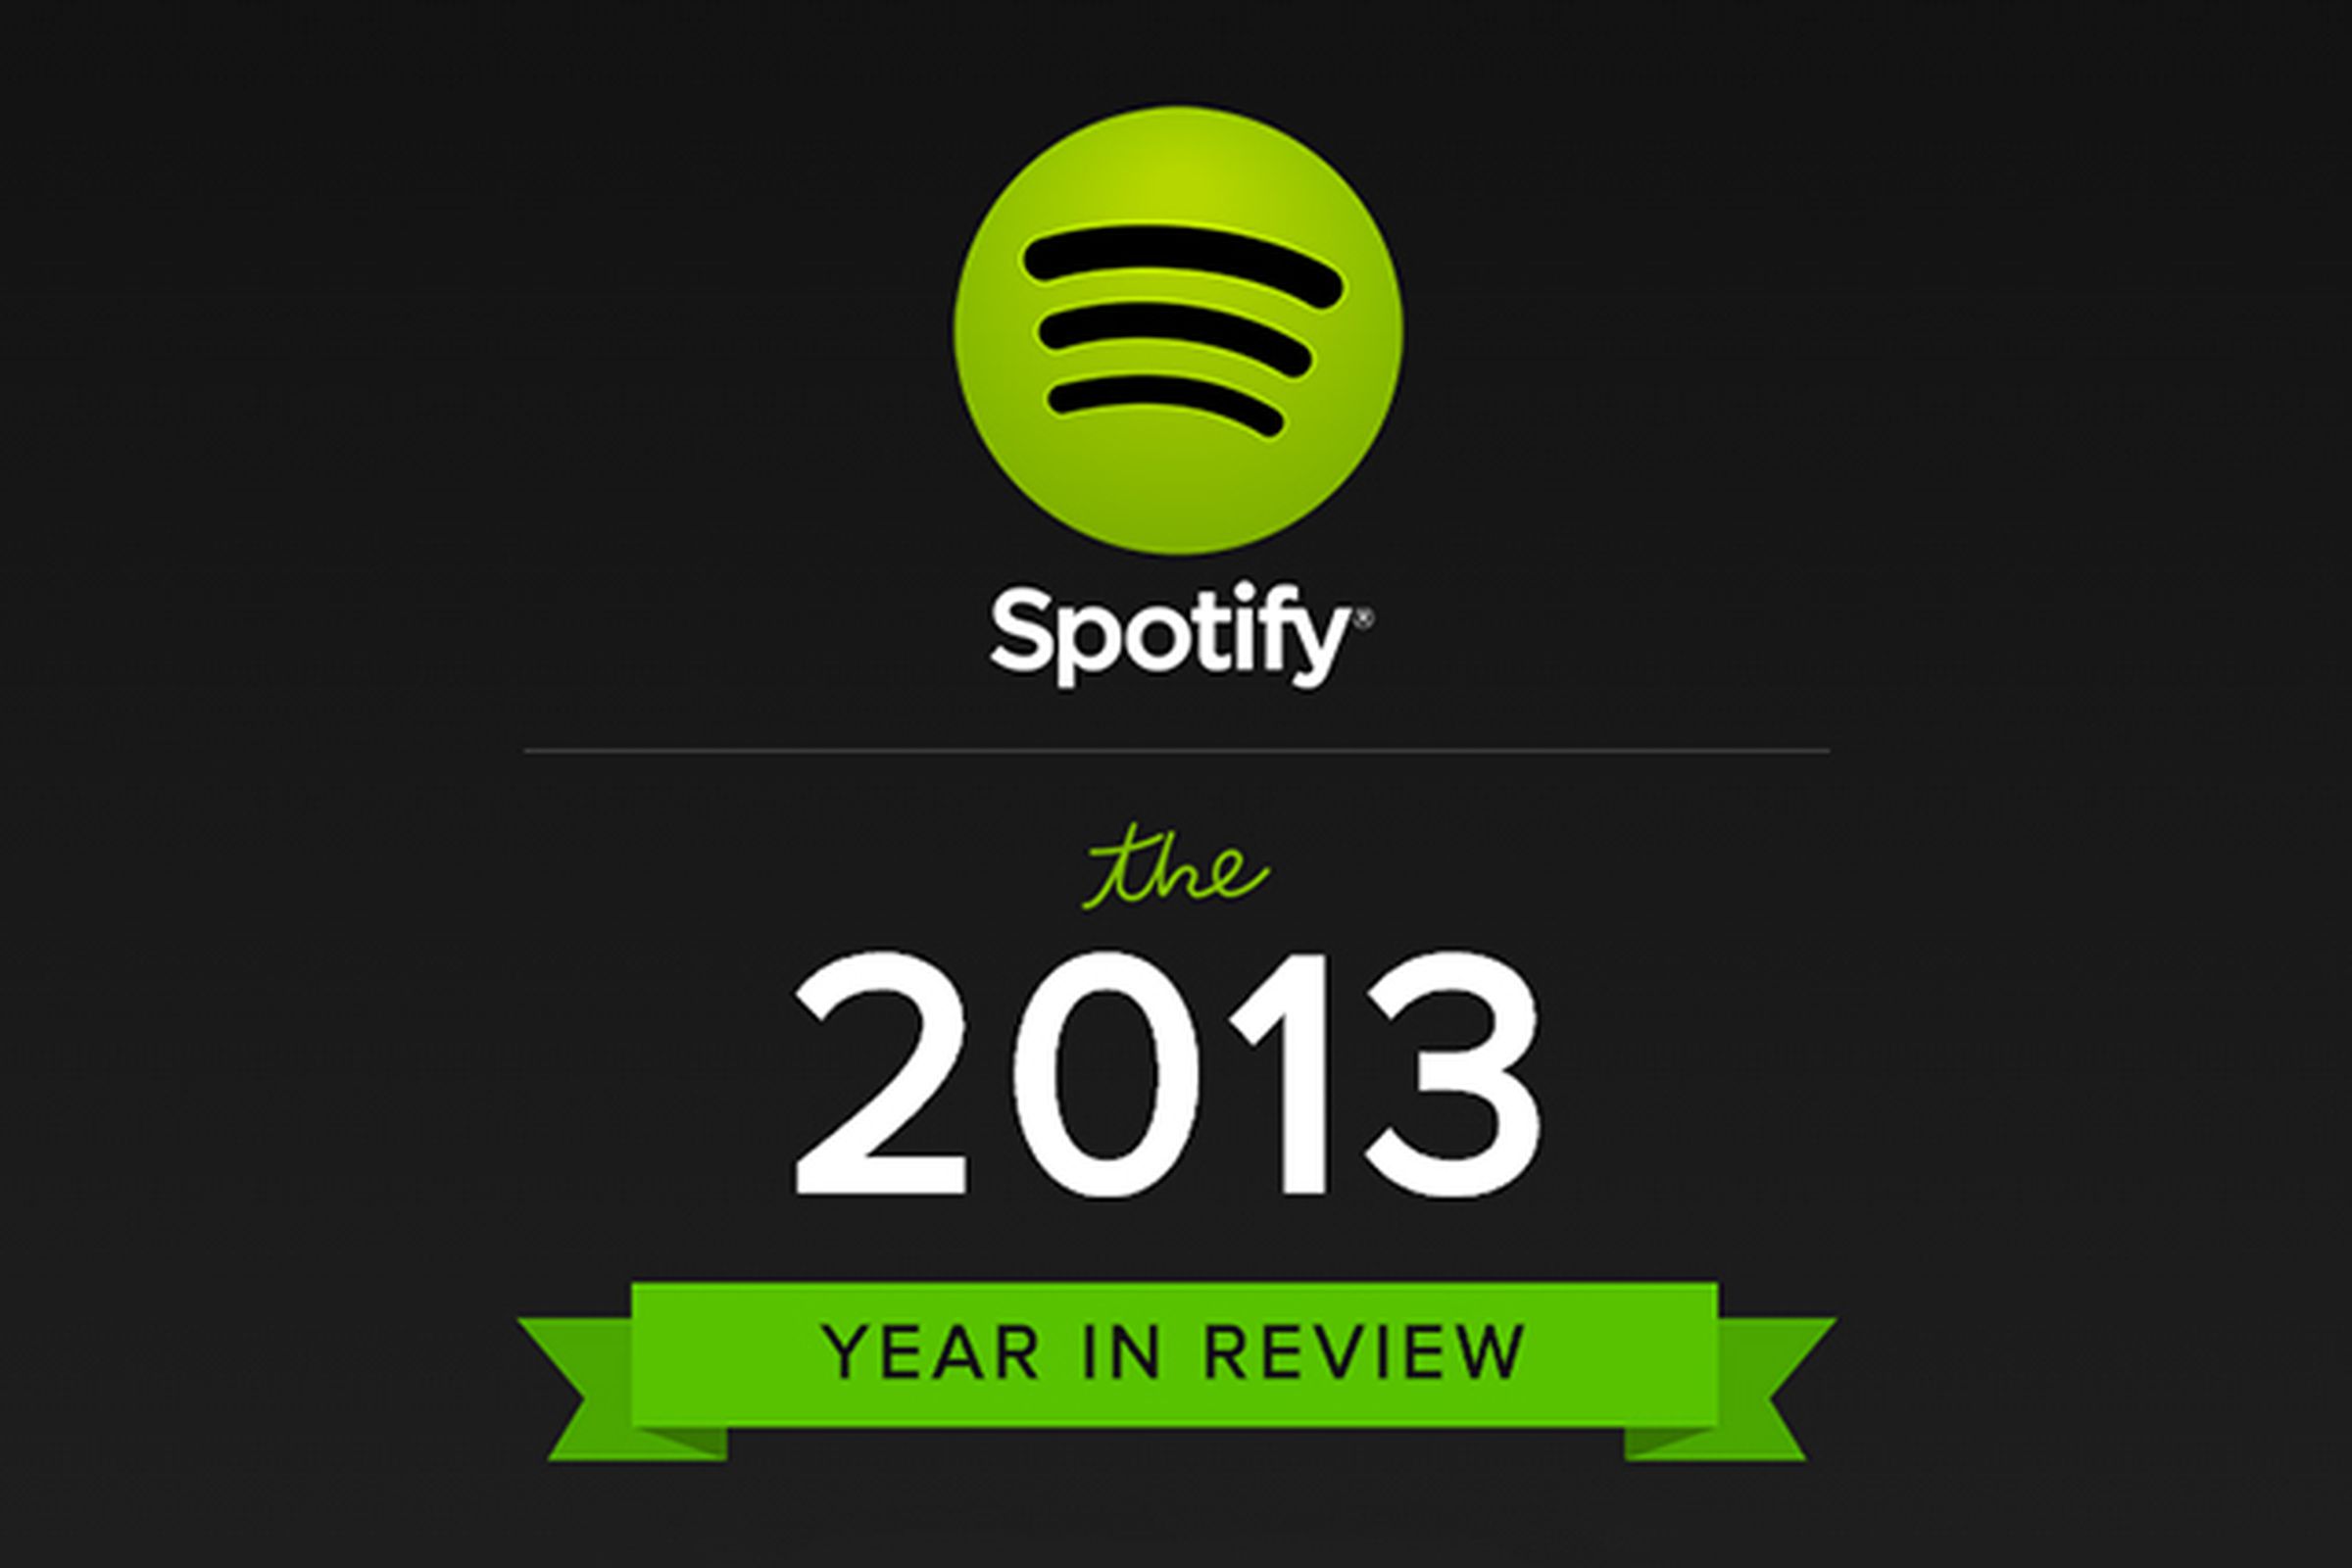 Spotify year in review